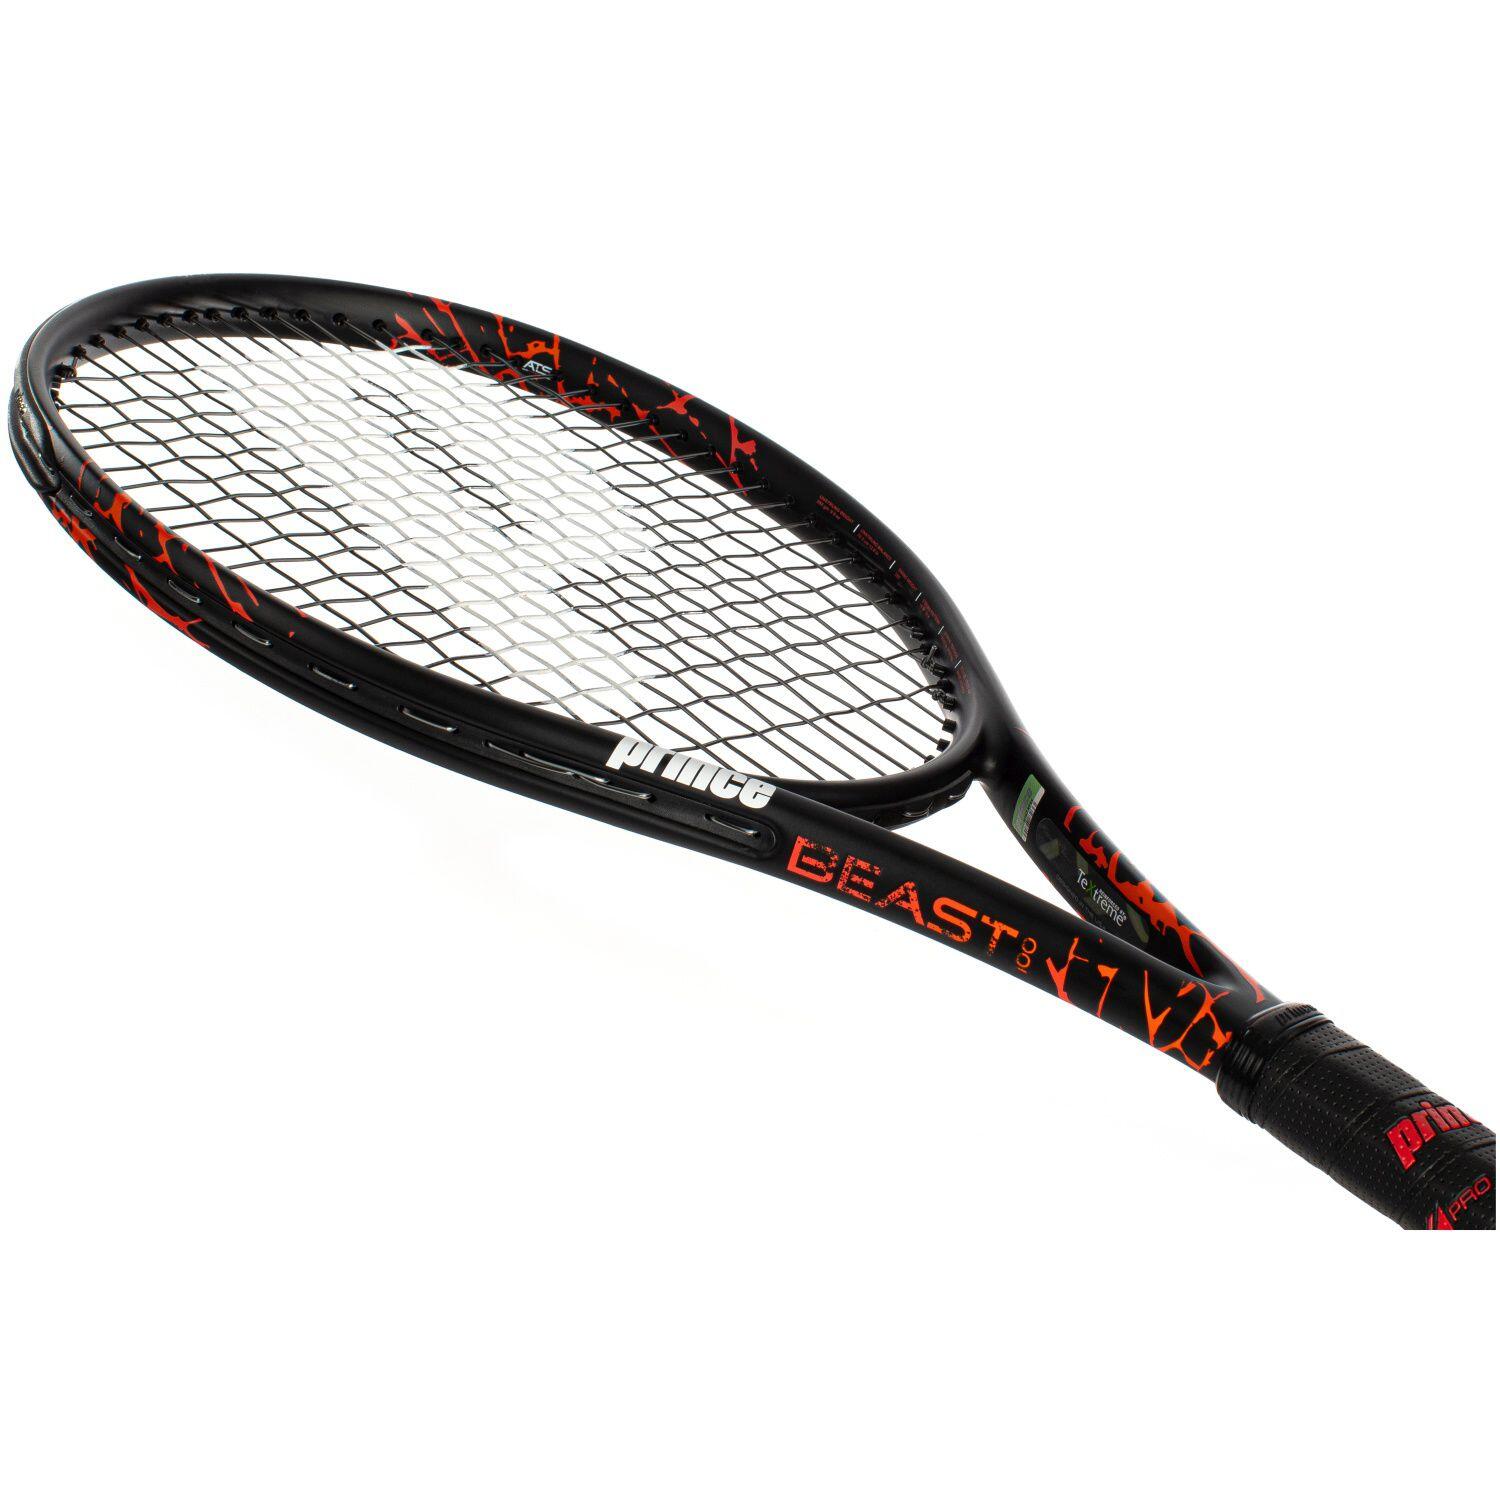 Prince Textreme Beast 100 280g Tennis Racket - Frame Only 5/6